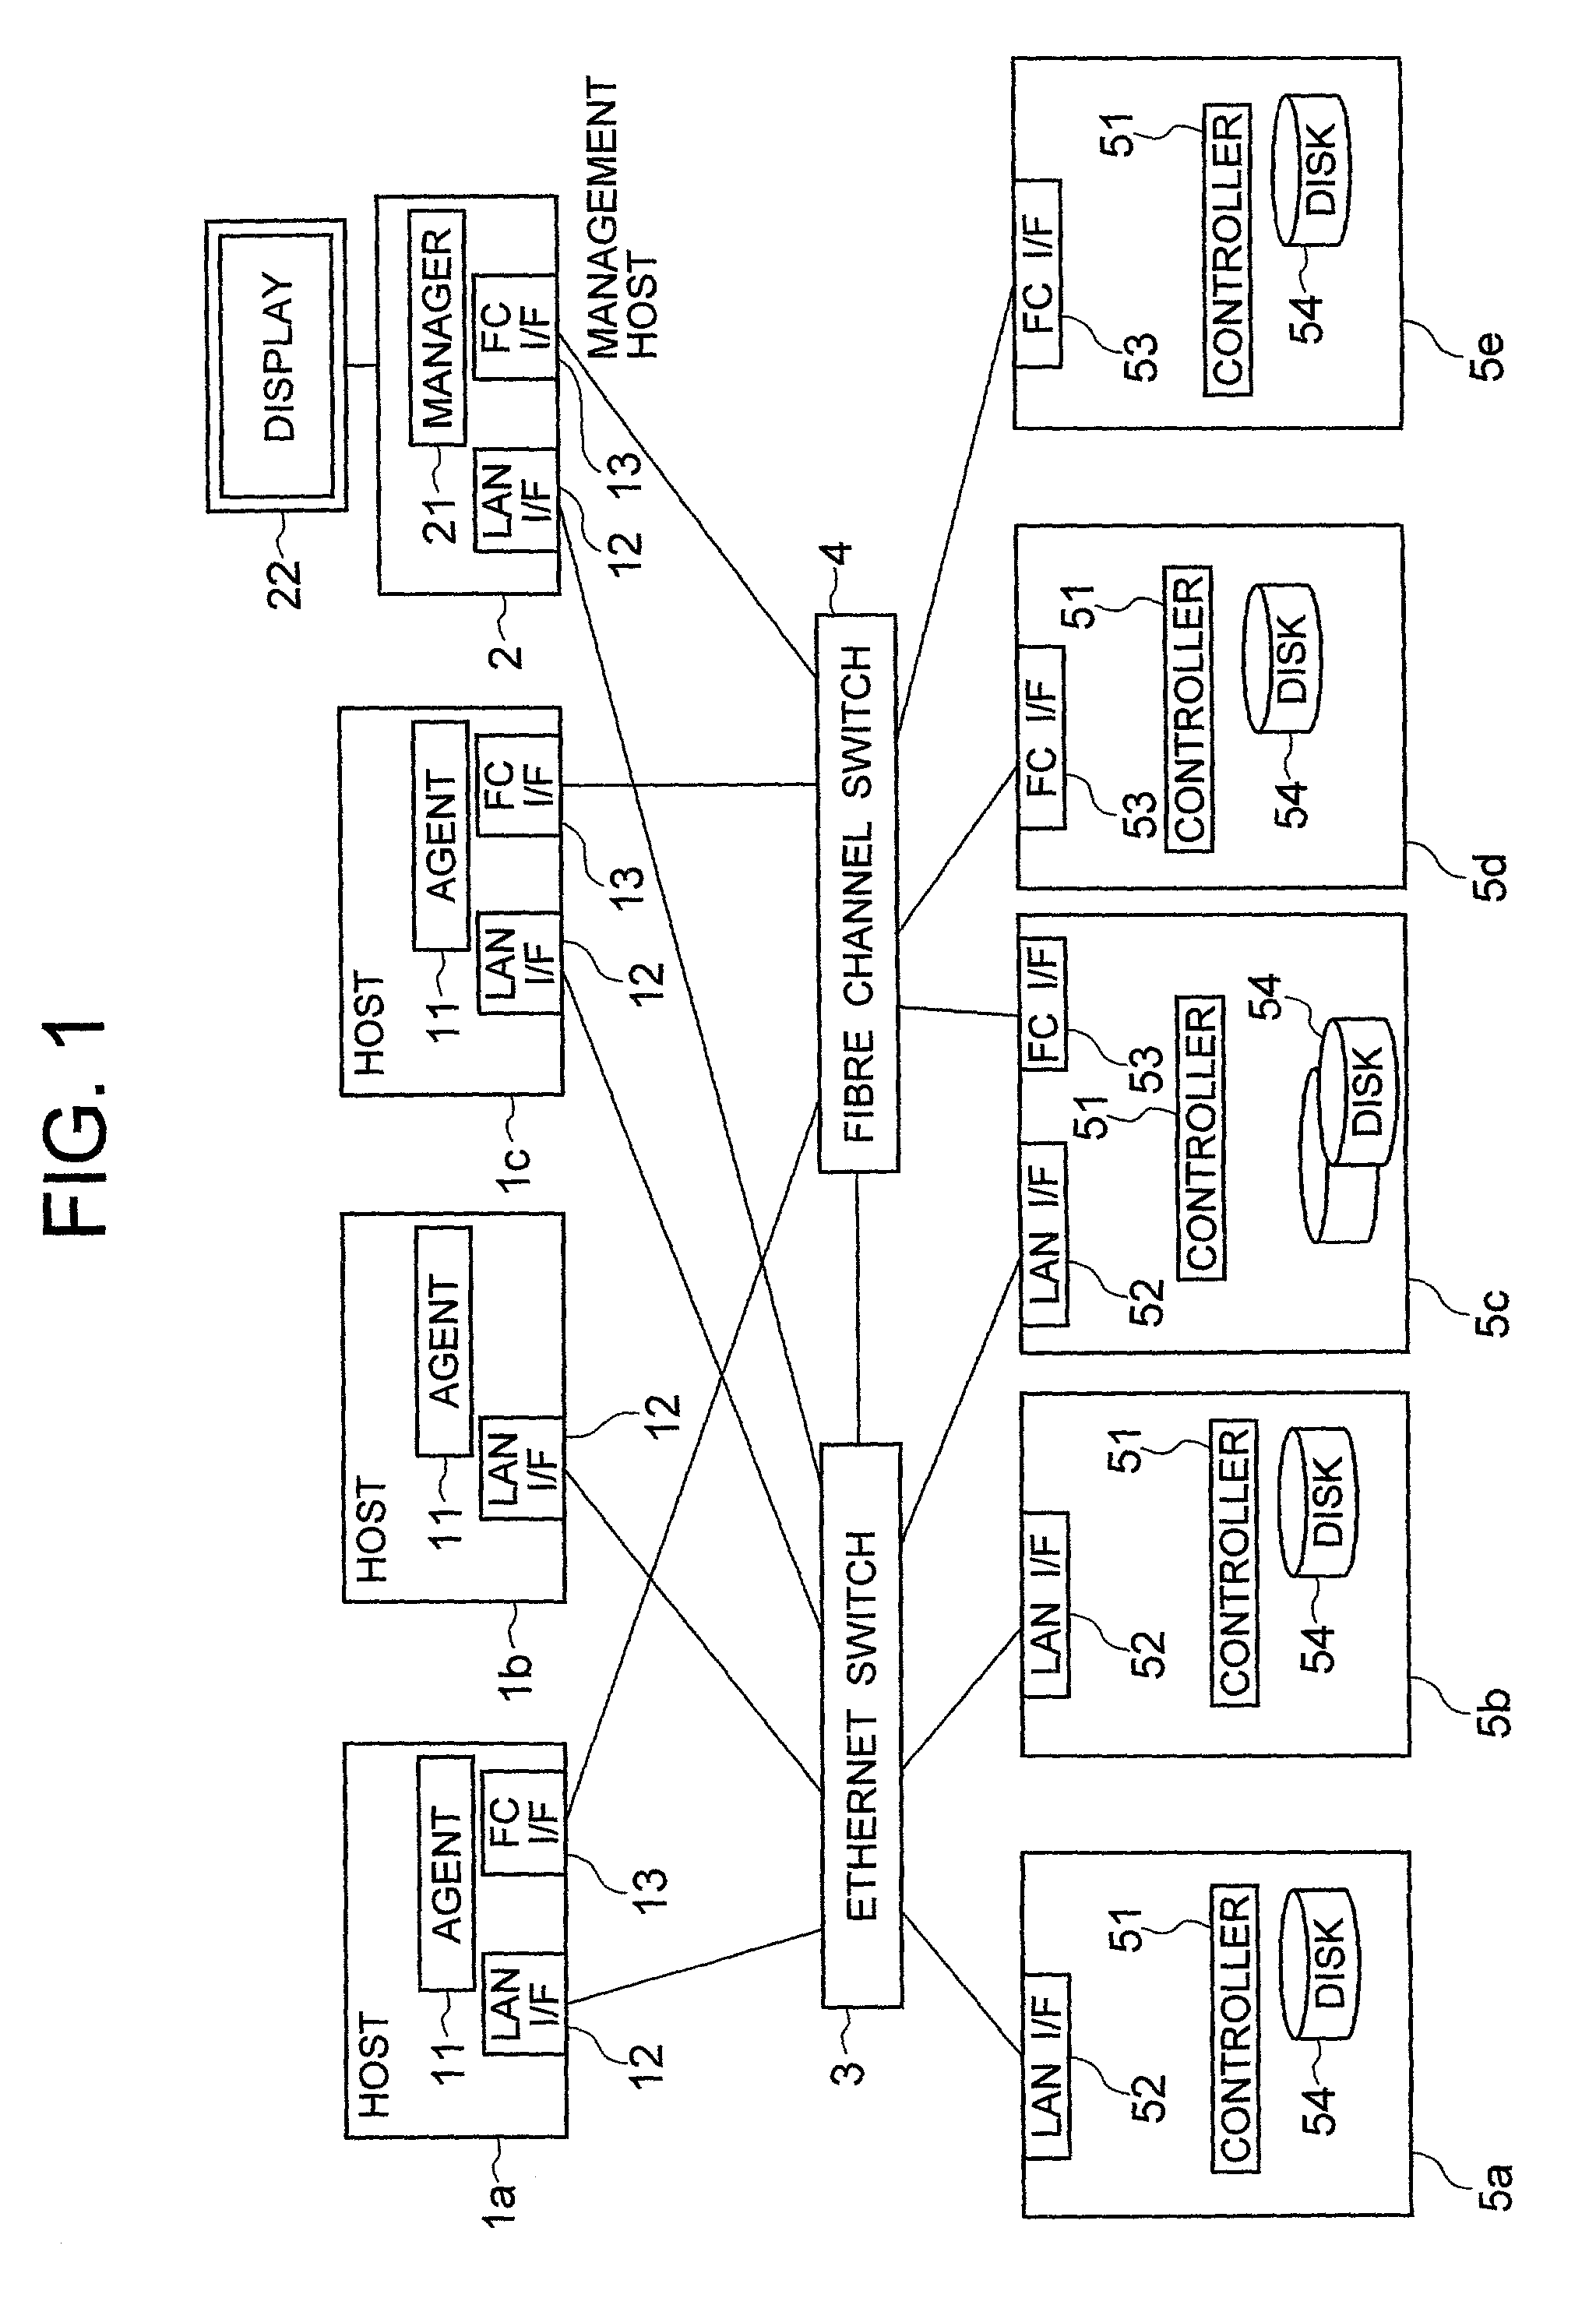 System and method for displaying storage system topology